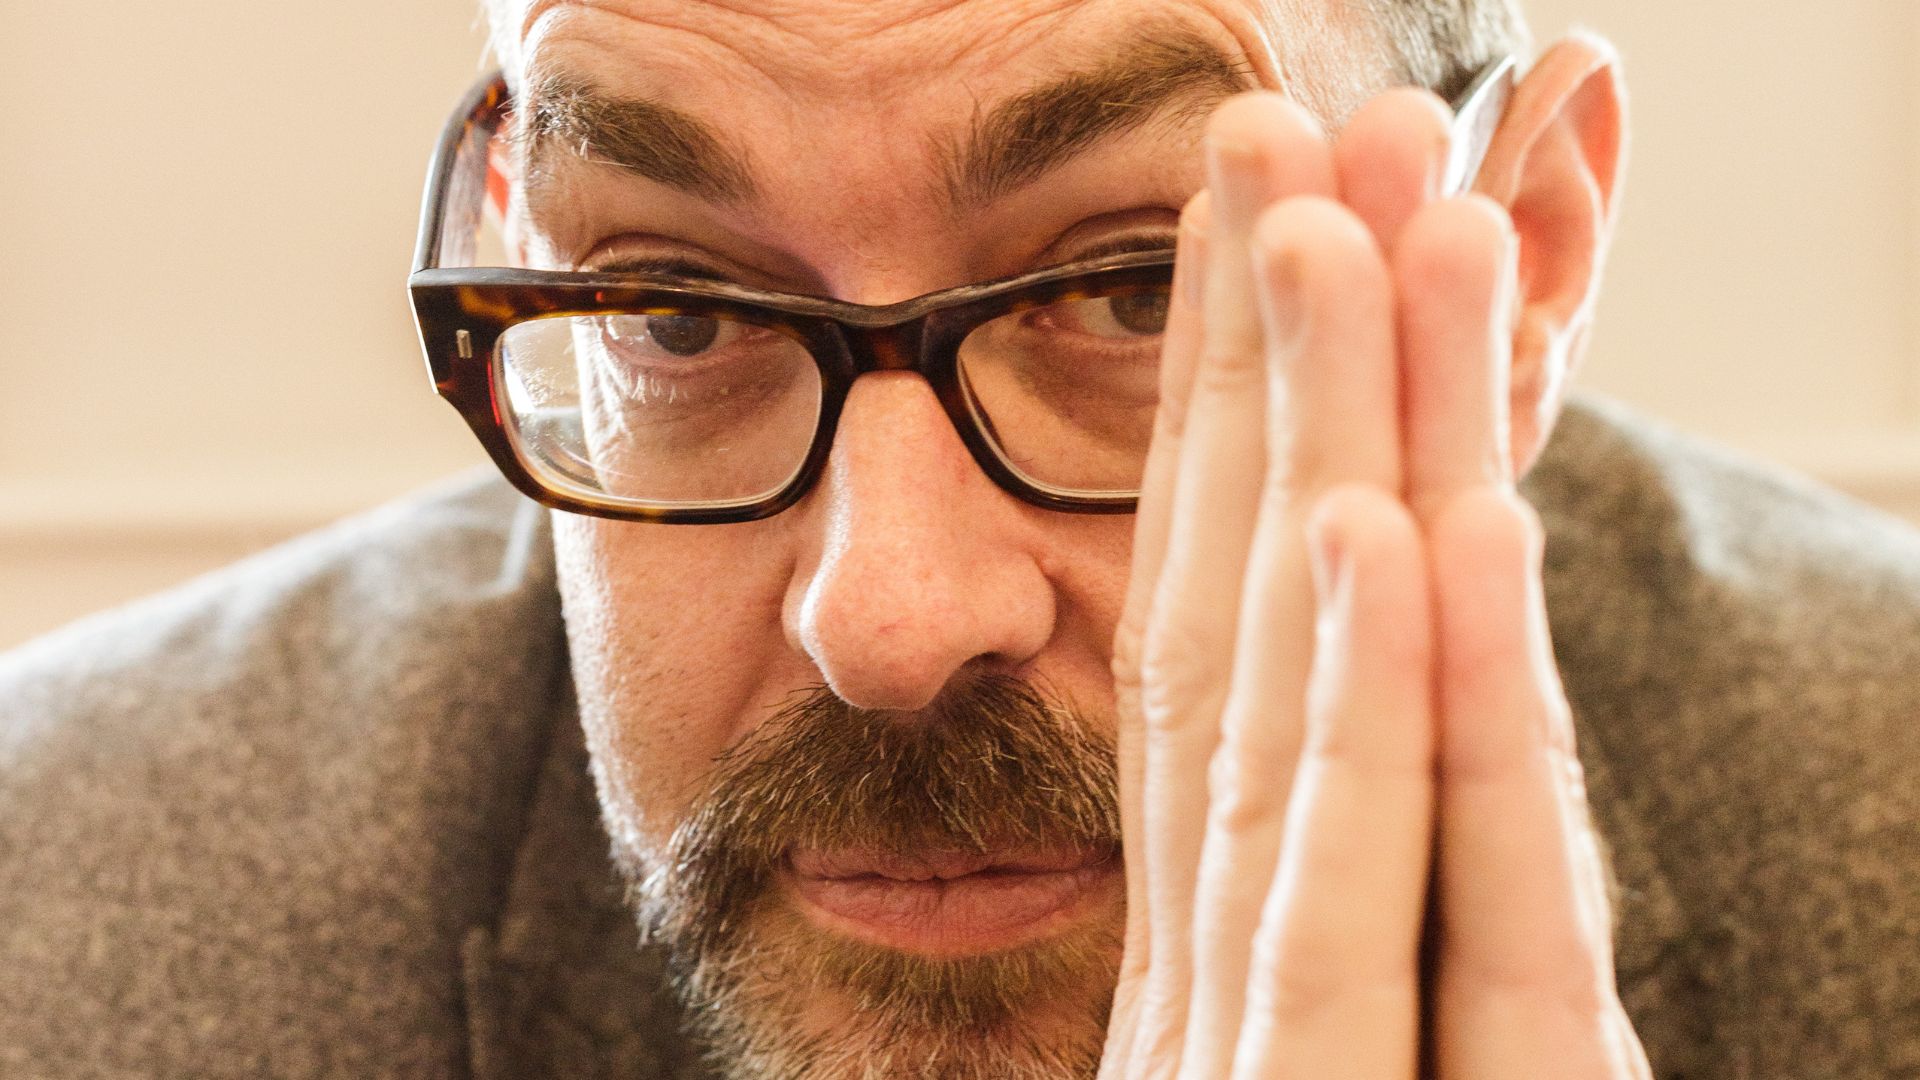 close-up photo of Richard Osman's face with his palms in a prayer position